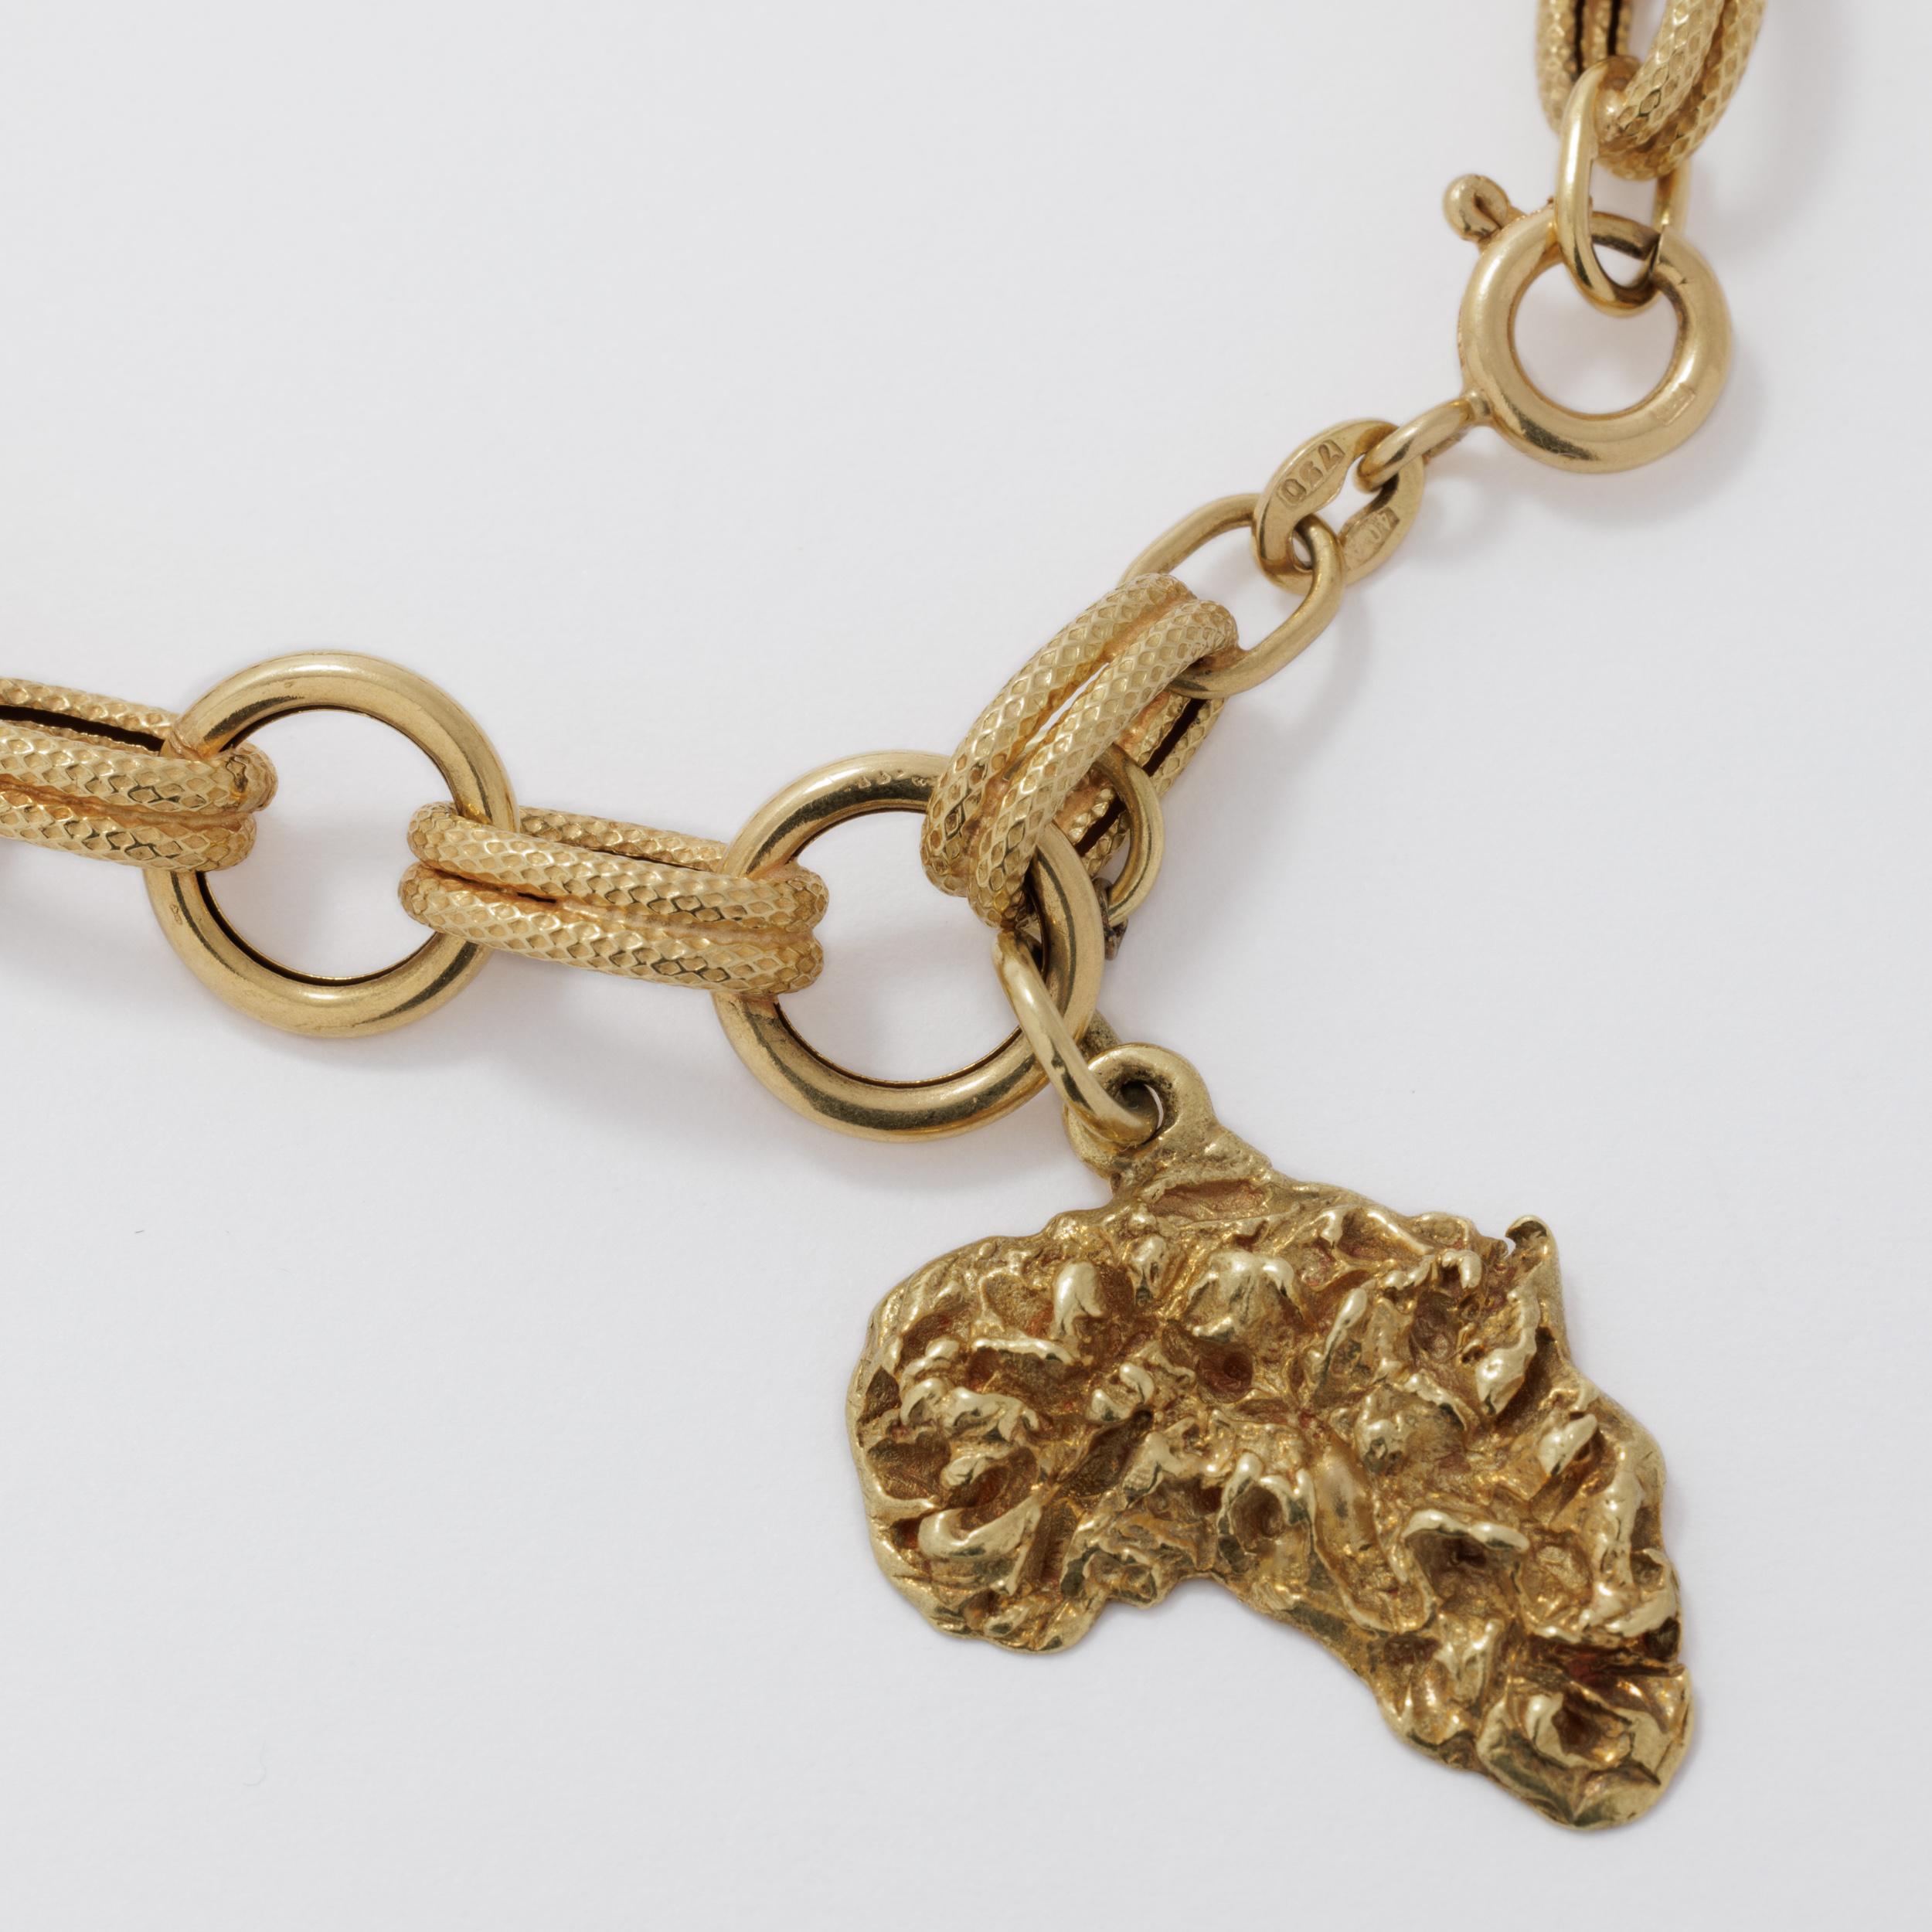 Vintage 18 Karat Rare African Souvenir Charm Bracelet In Good Condition For Sale In New York, NY